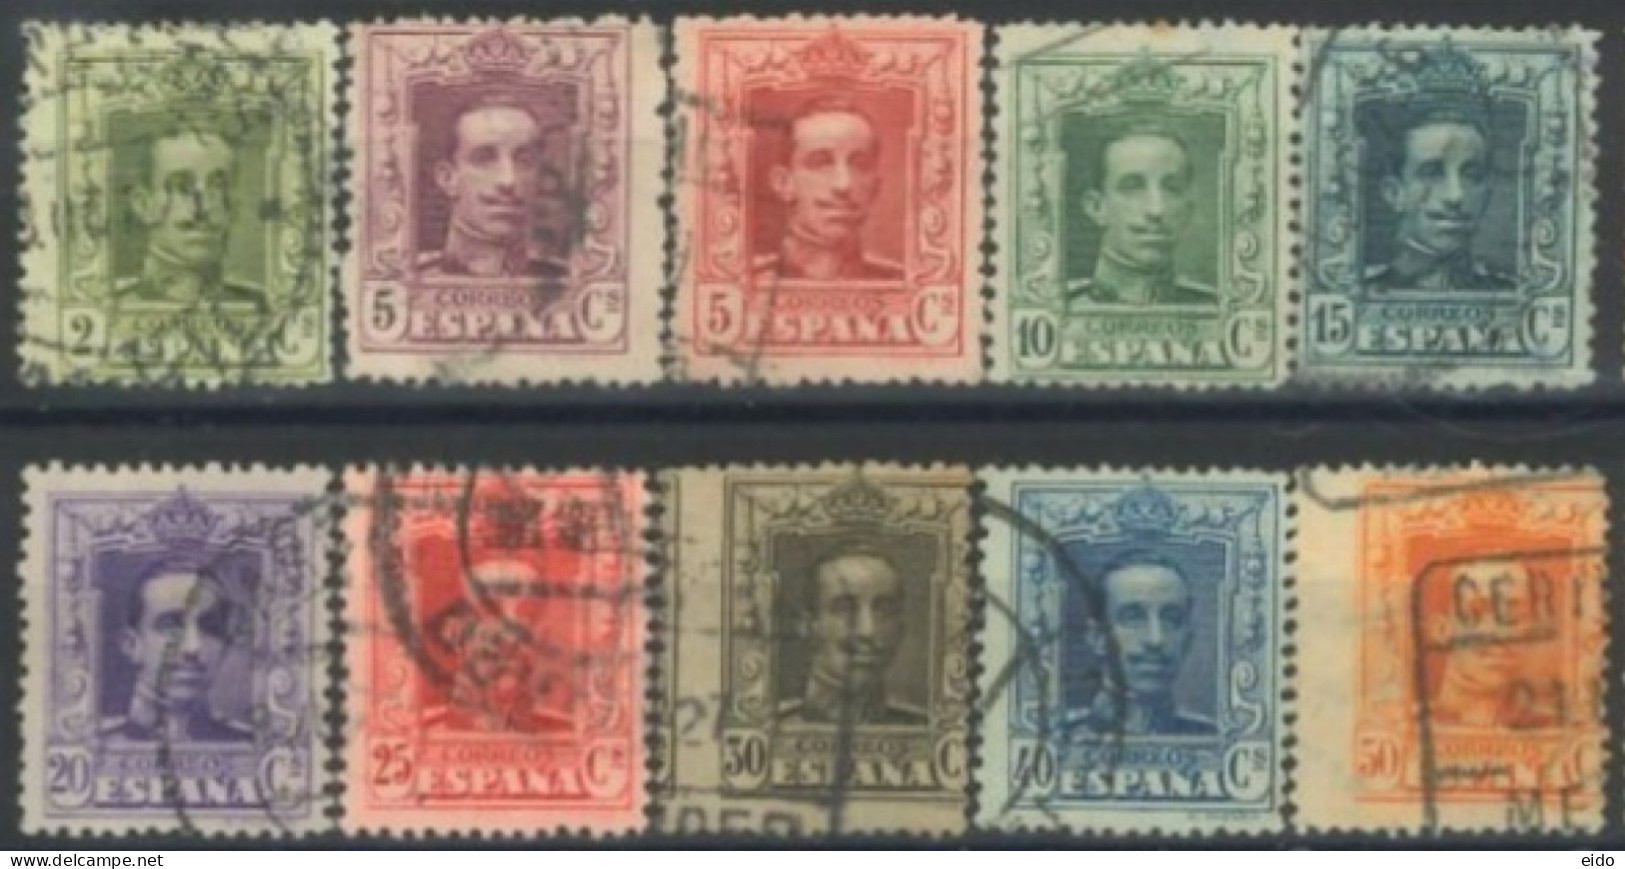 SPAIN, 1922/26, KING ALFONSO XIII STAMPS SET OF 10, # 331/33, &335/41, USED. - Usados